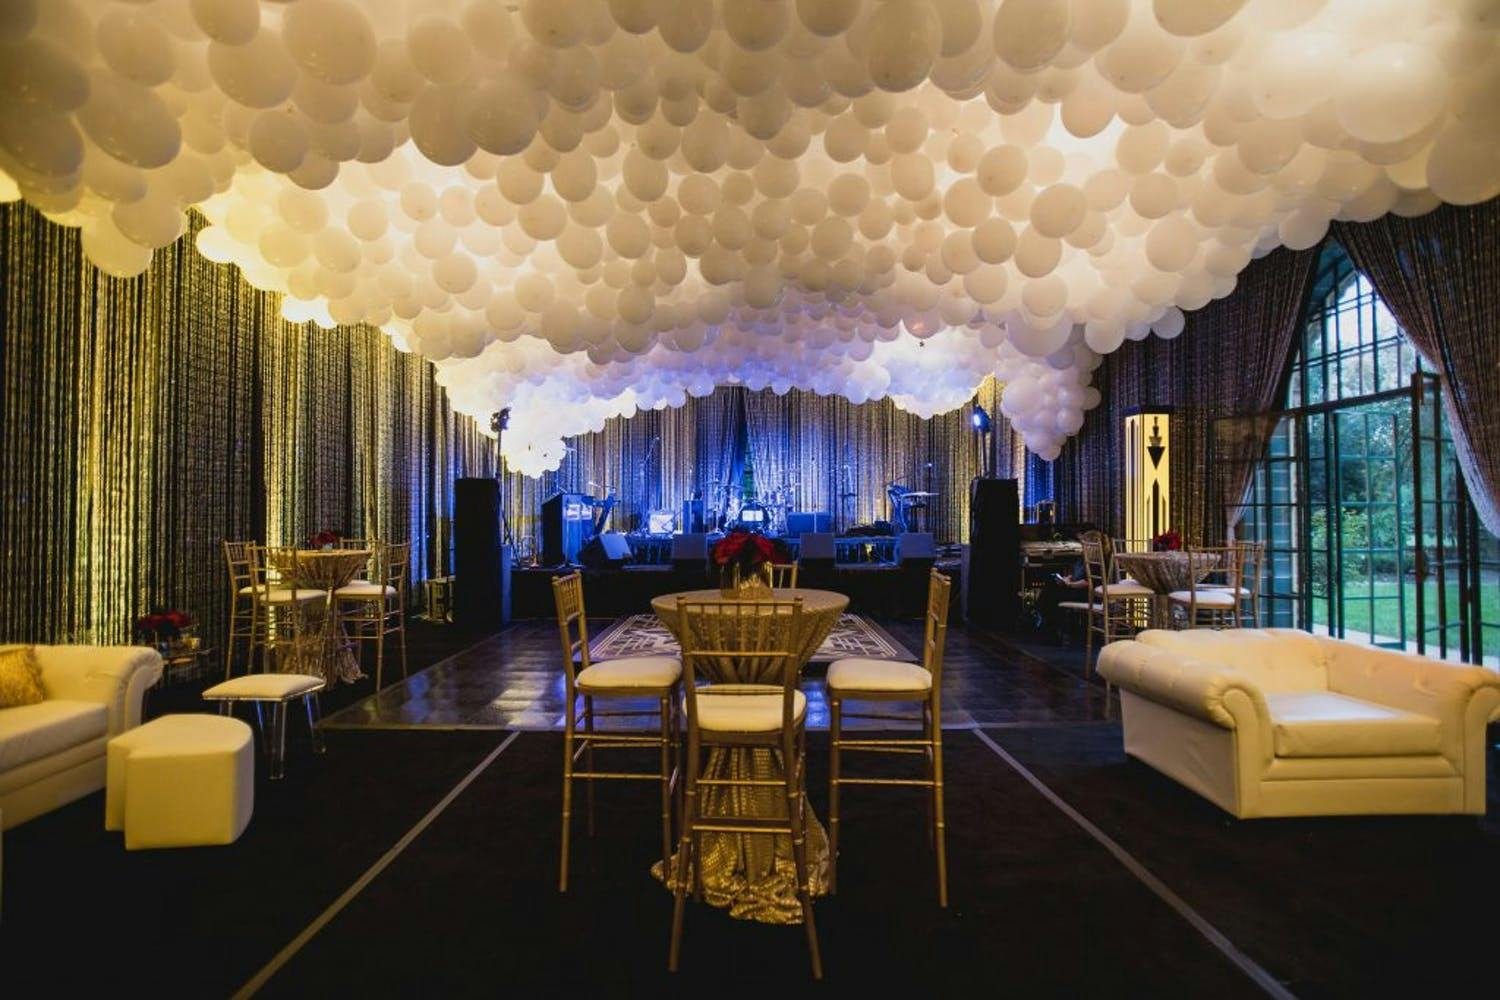 Gatsby-themed Birthday Party Venue With White Balloon Ceiling Installation | PartySlate